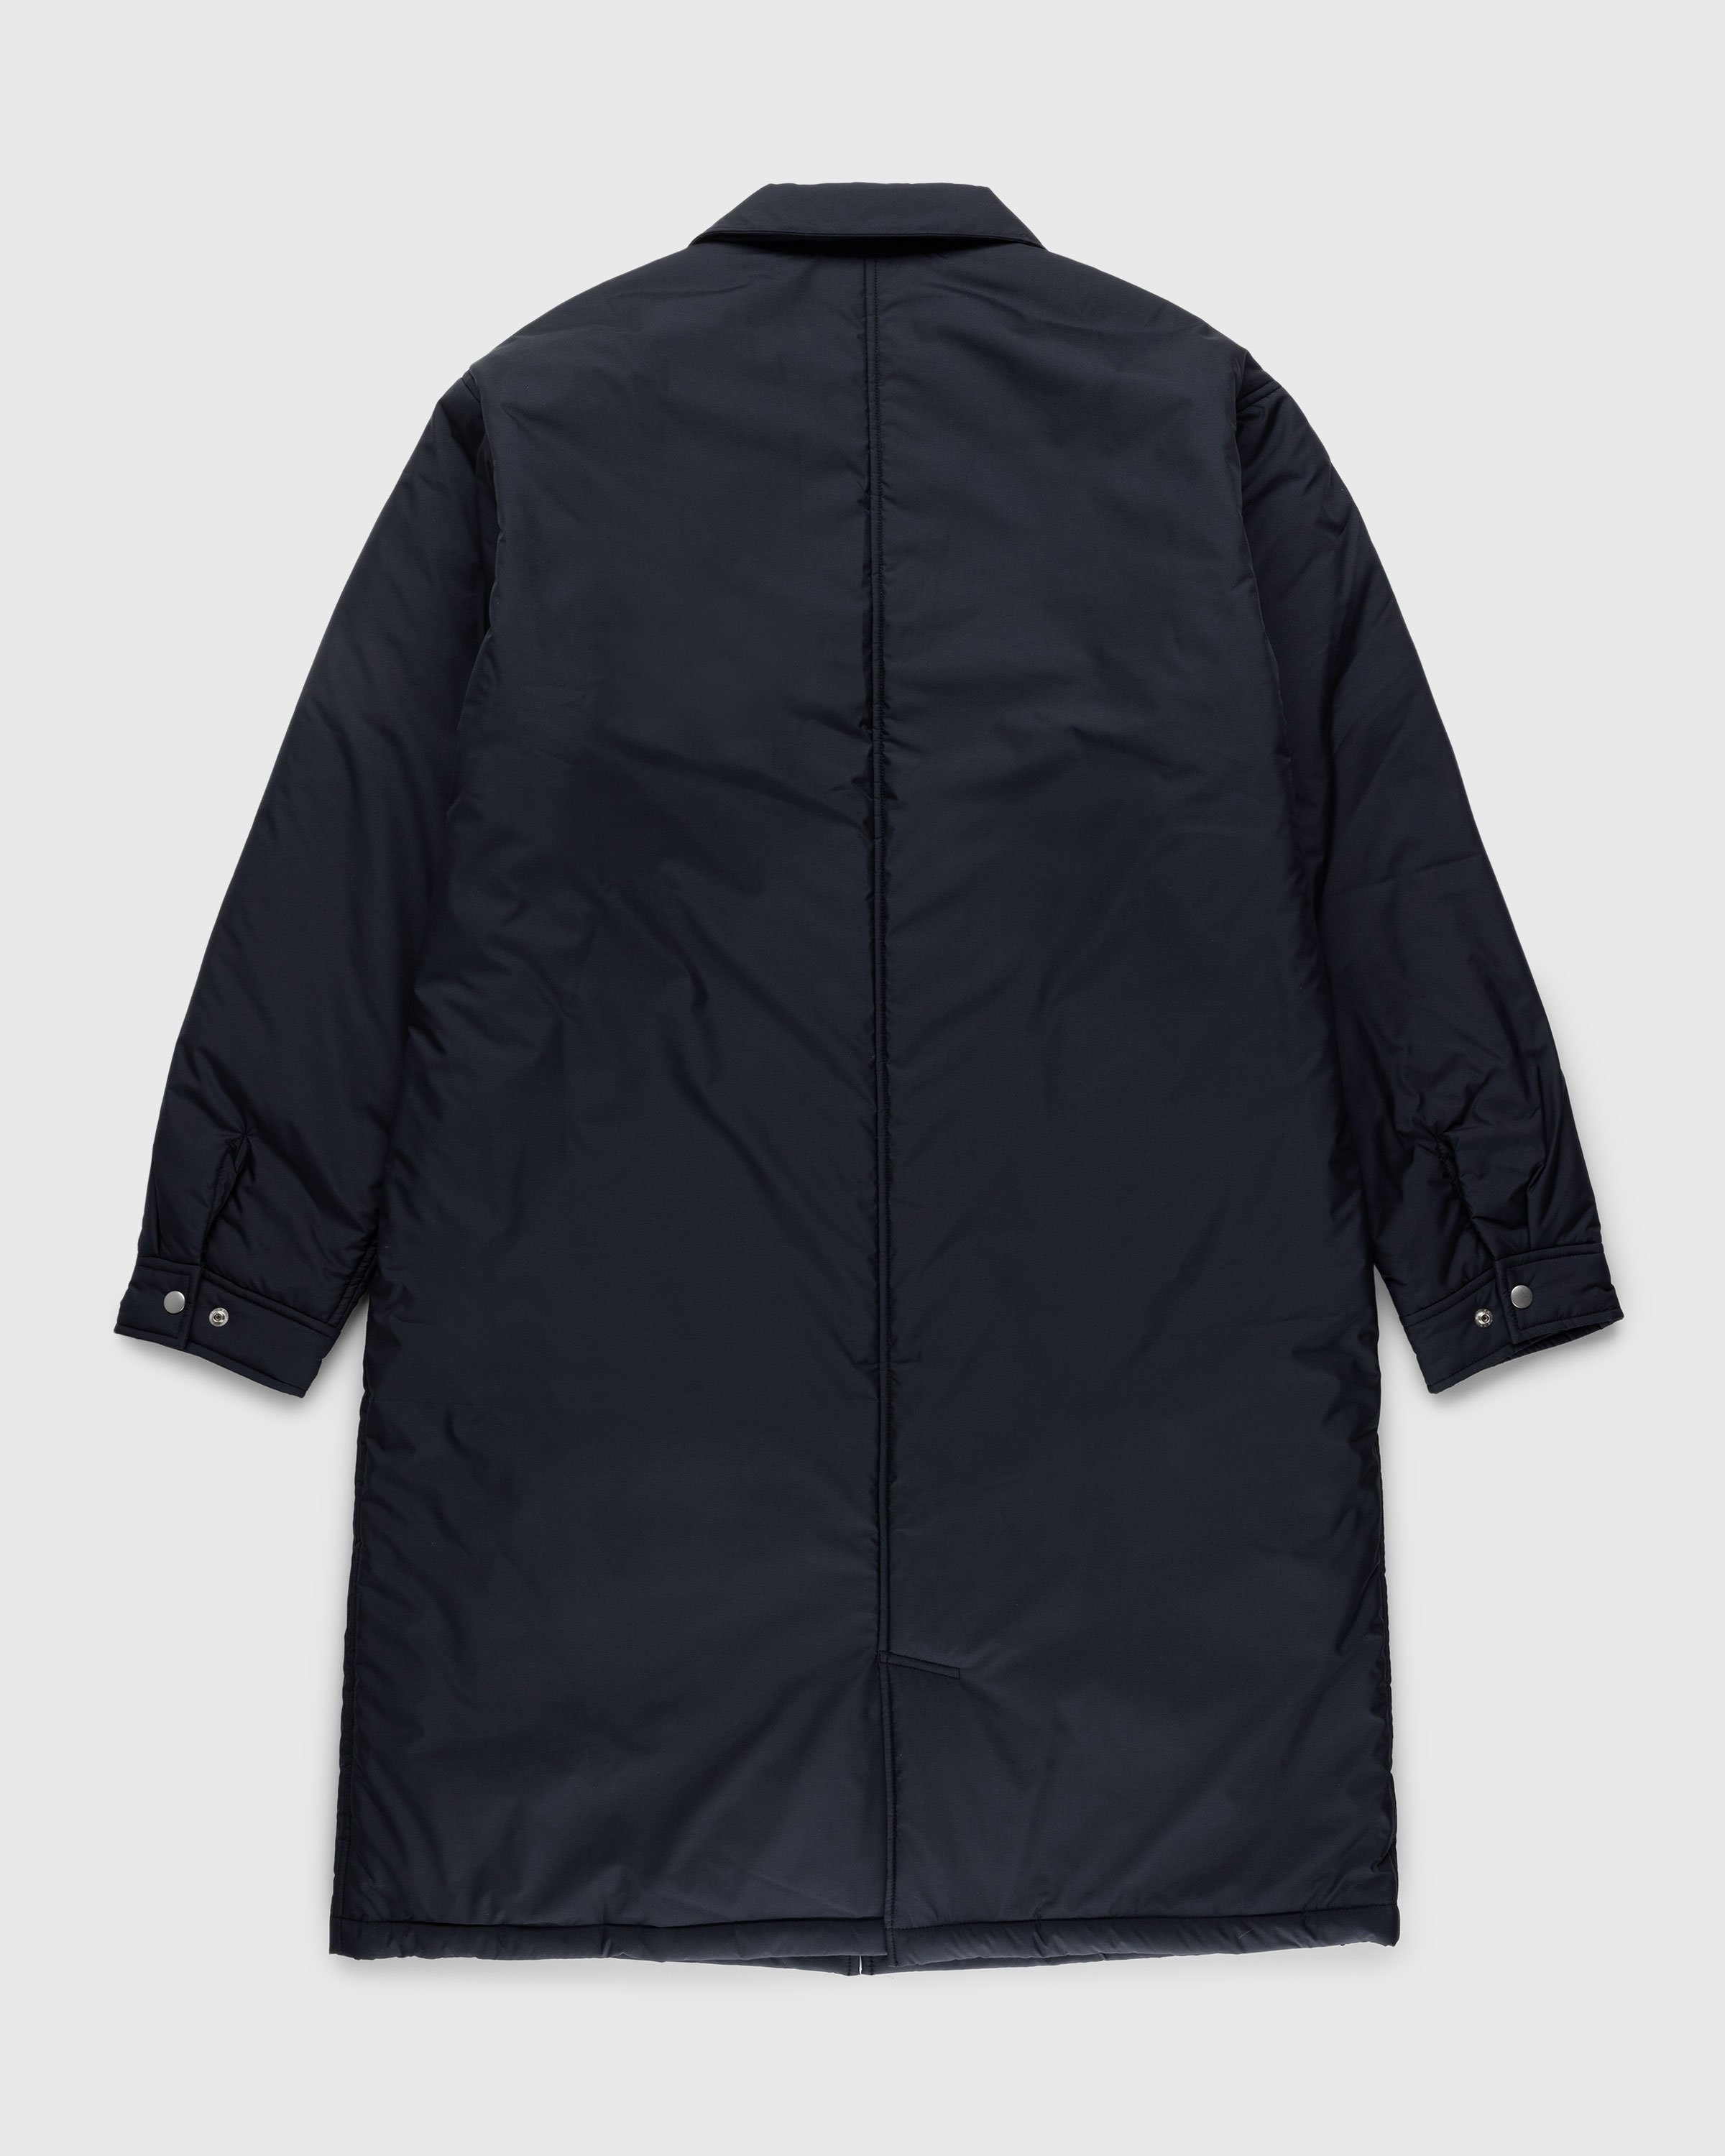 Highsnobiety HS05 – Light Insulated Eco-Poly Trench Coat Black - Outerwear - Black - Image 2